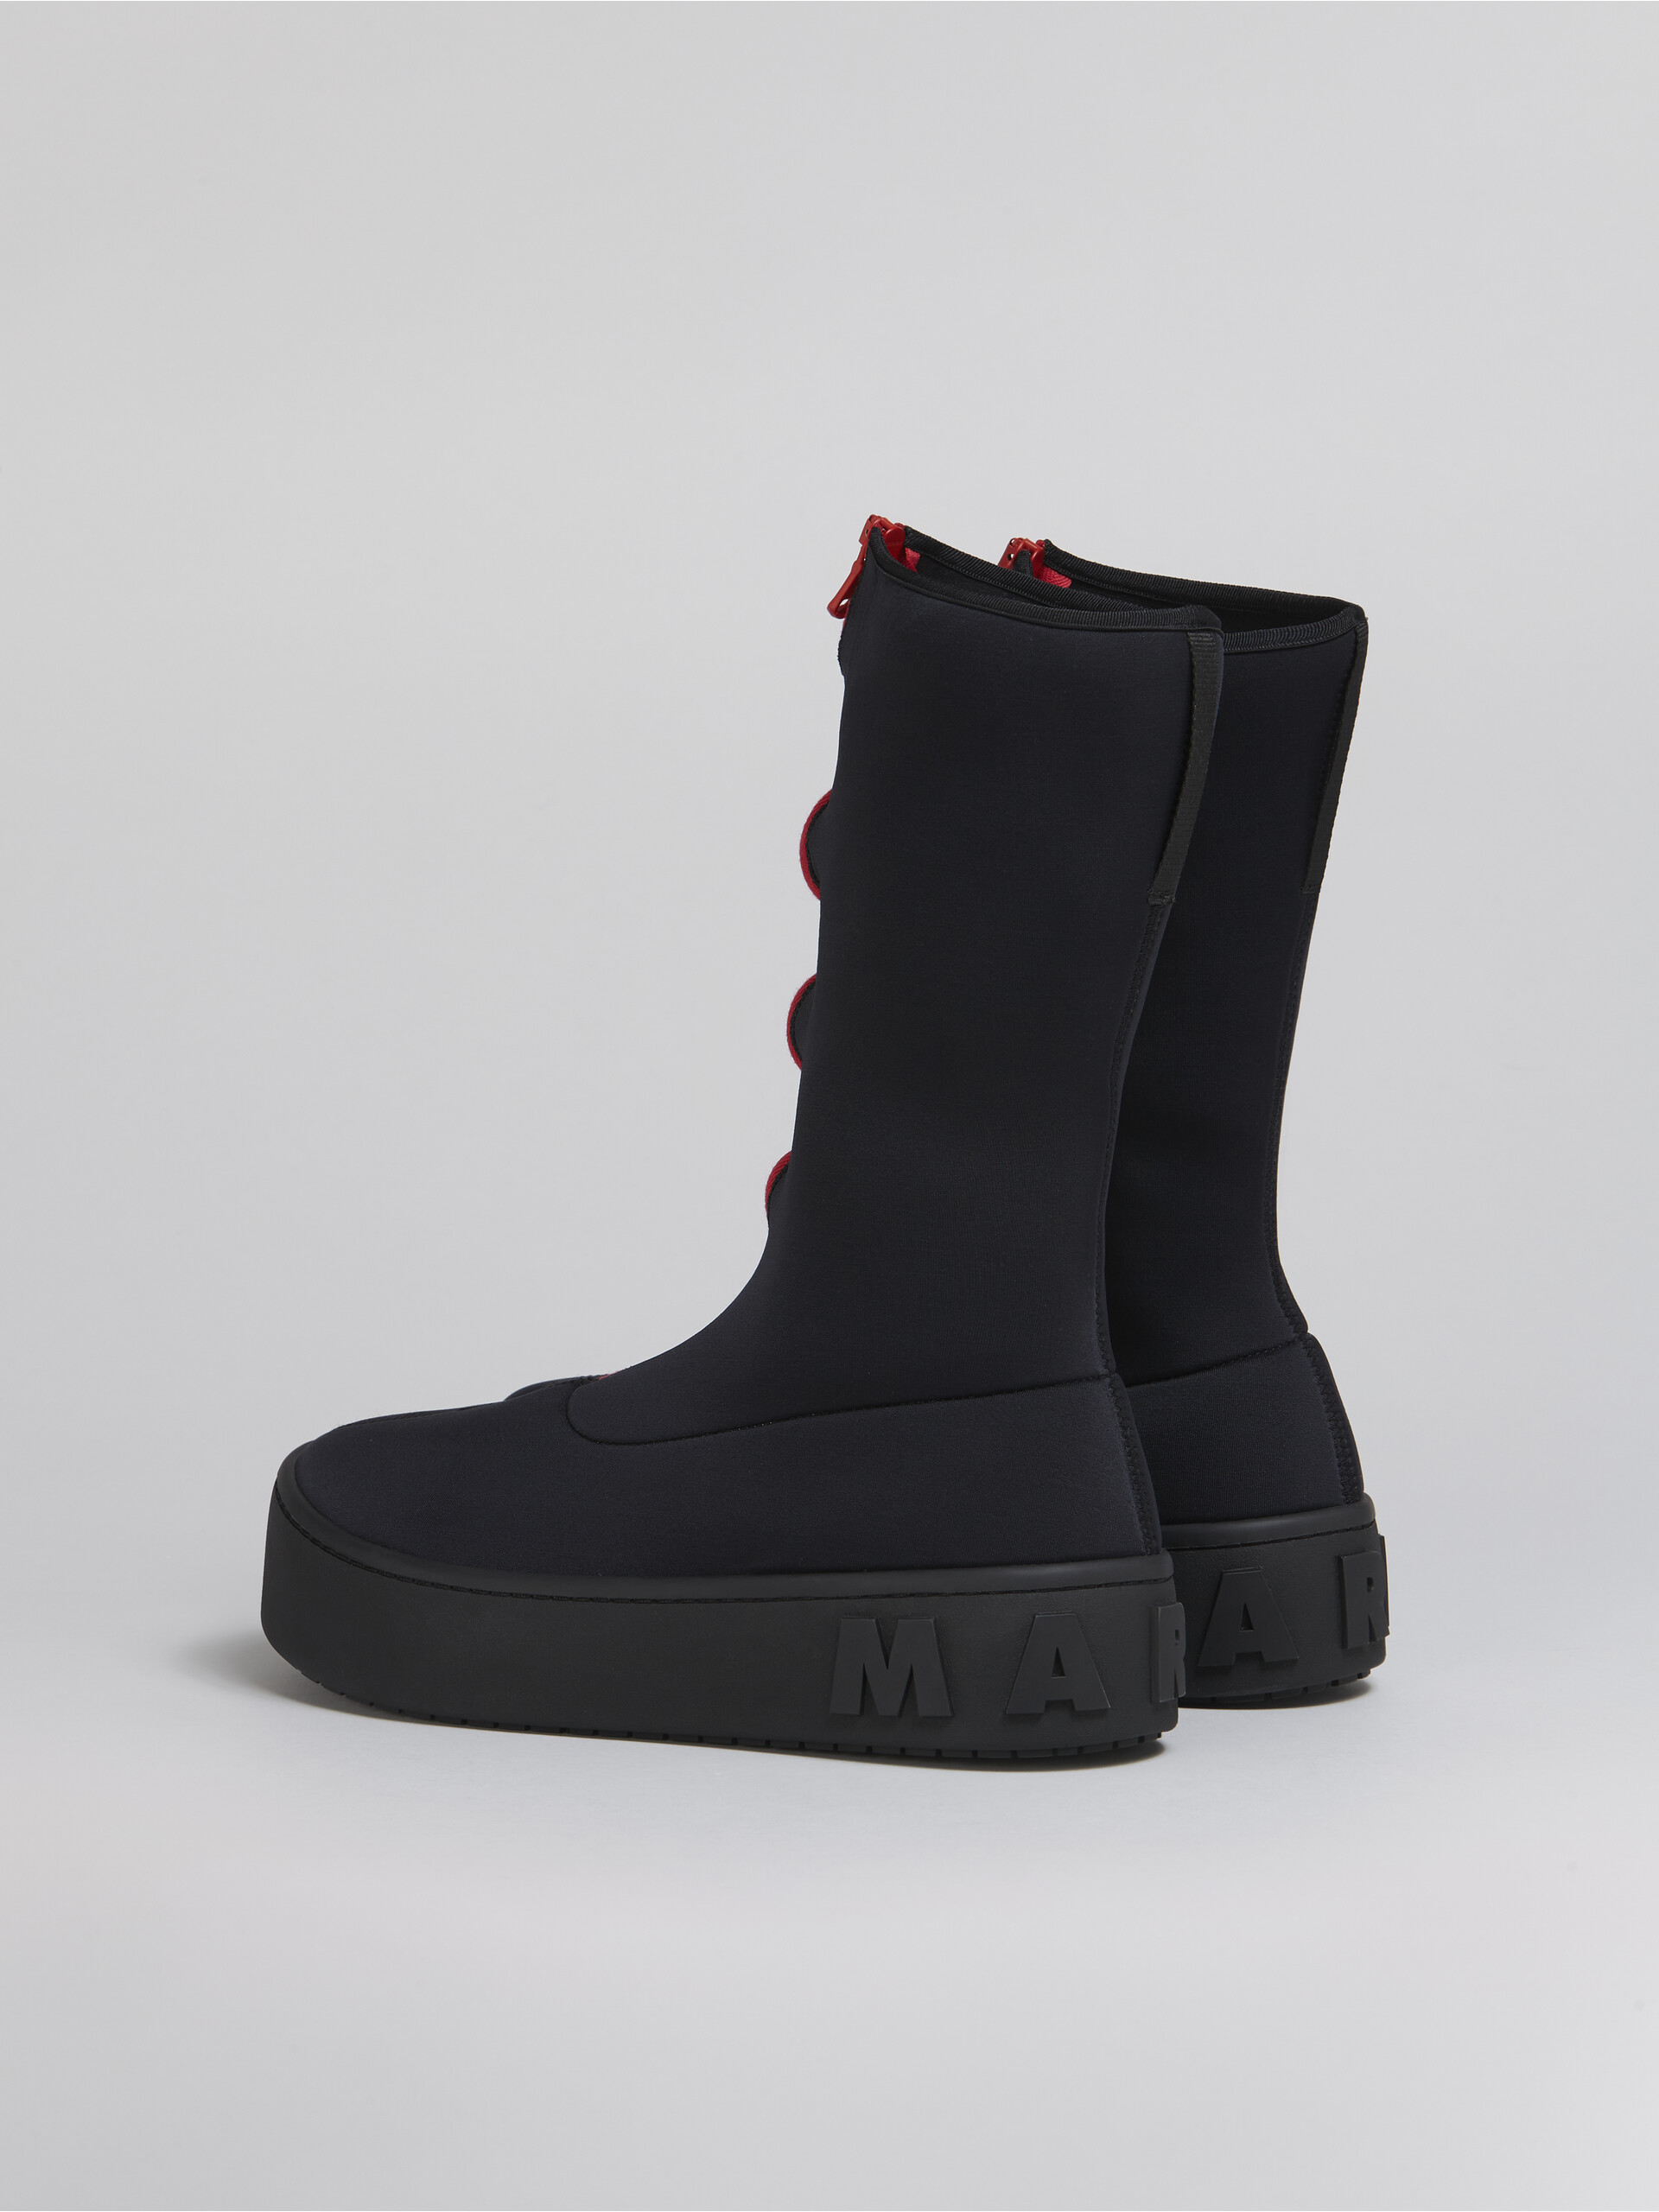 Bootie in stretch neoprene - Boots - Image 3